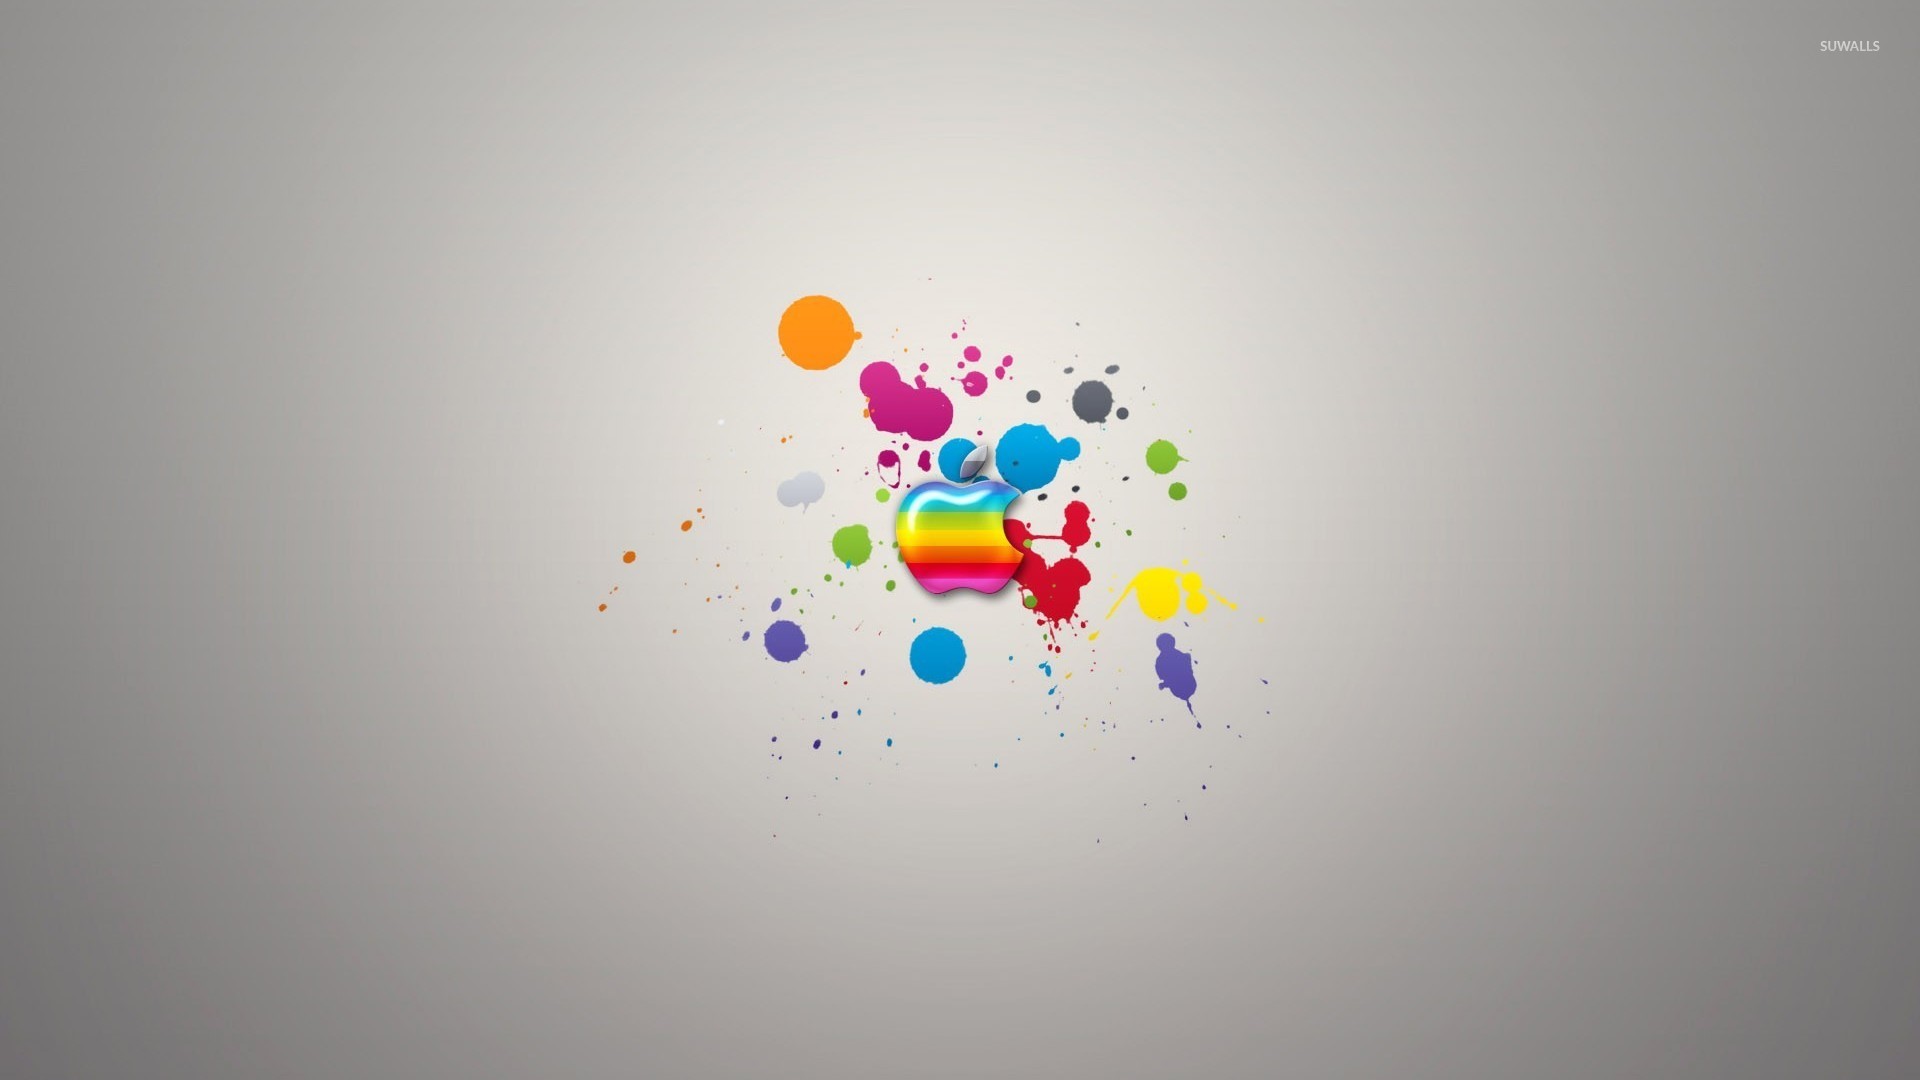 Colorful Apple on paint splash wallpaper - Computer wallpapers - #54172